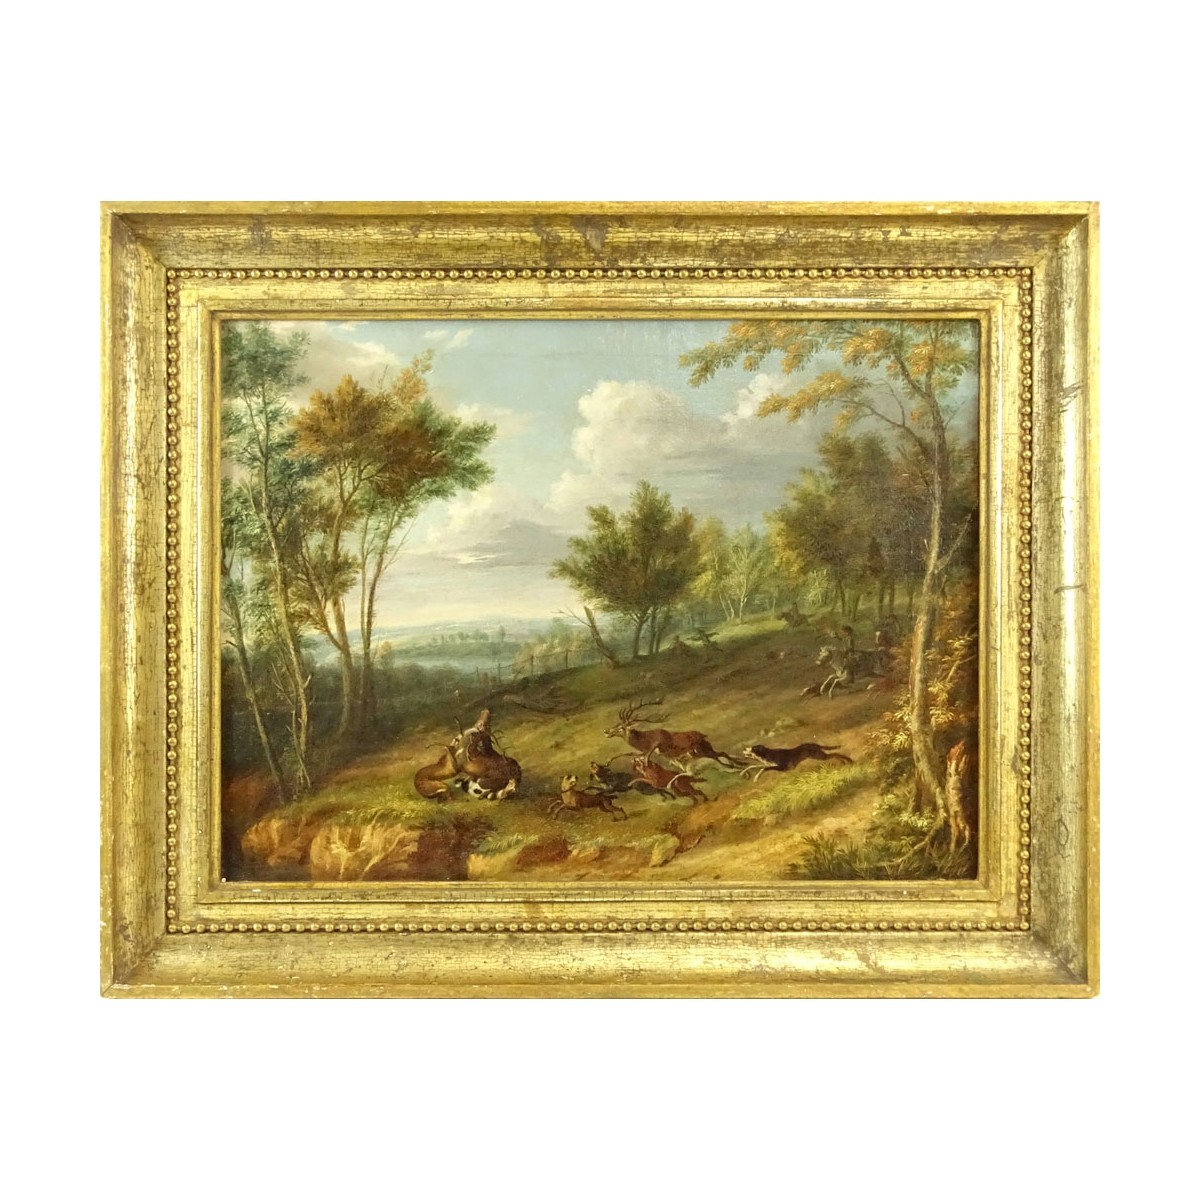 Friedrich Wilhelm Hirt, German (1721-1772) Oil on Canvas, Stag Hunt. Unsigned. Very good conserved 